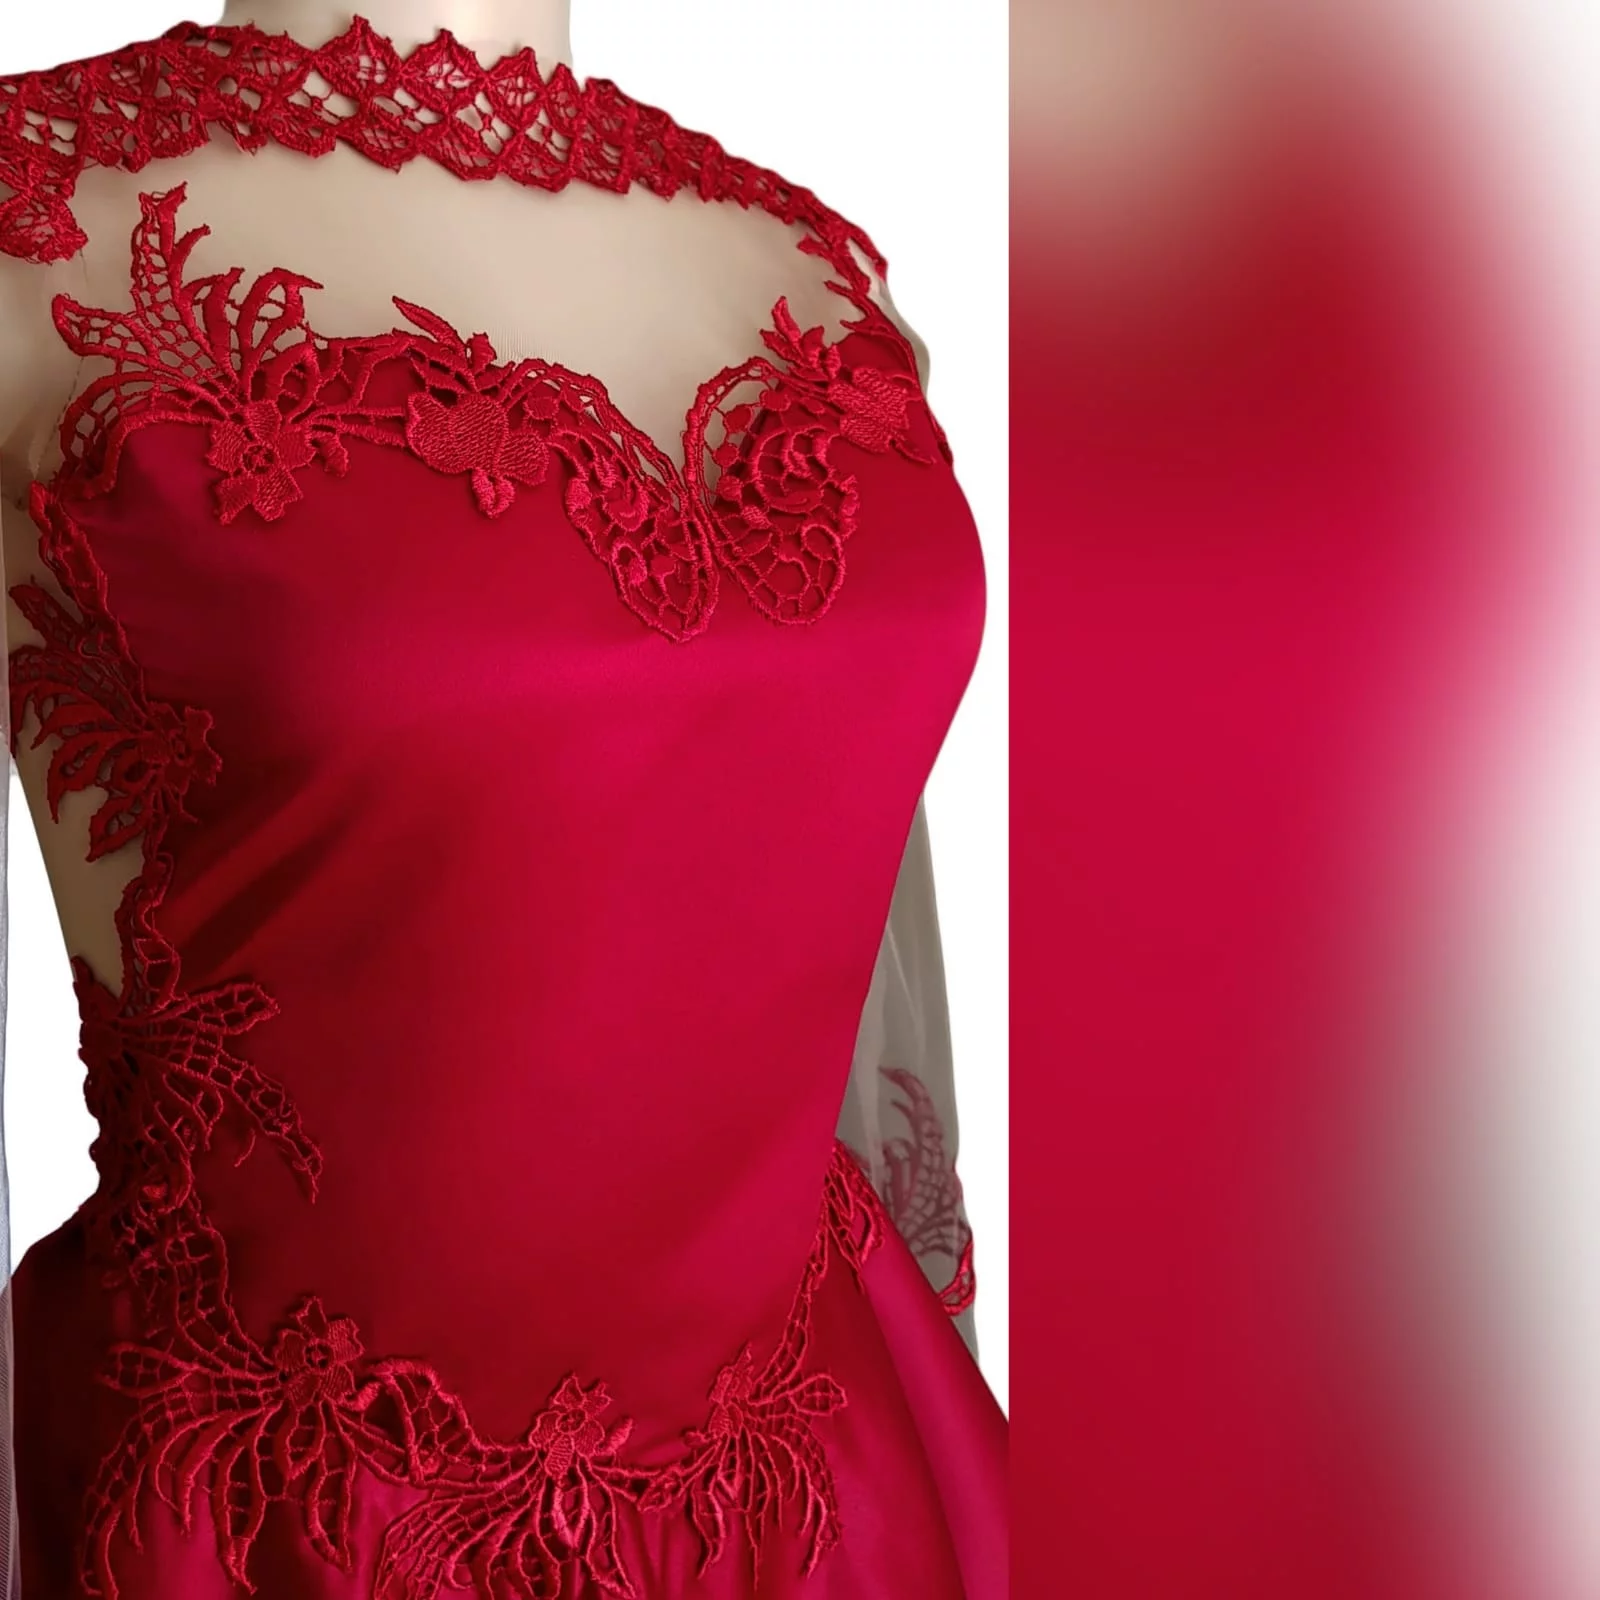 Red short satin prom dress 8 red short satin prom dress with an illusion neckline detailed with lace, long illusion lace sleeves. Illusion back detailed with lace.